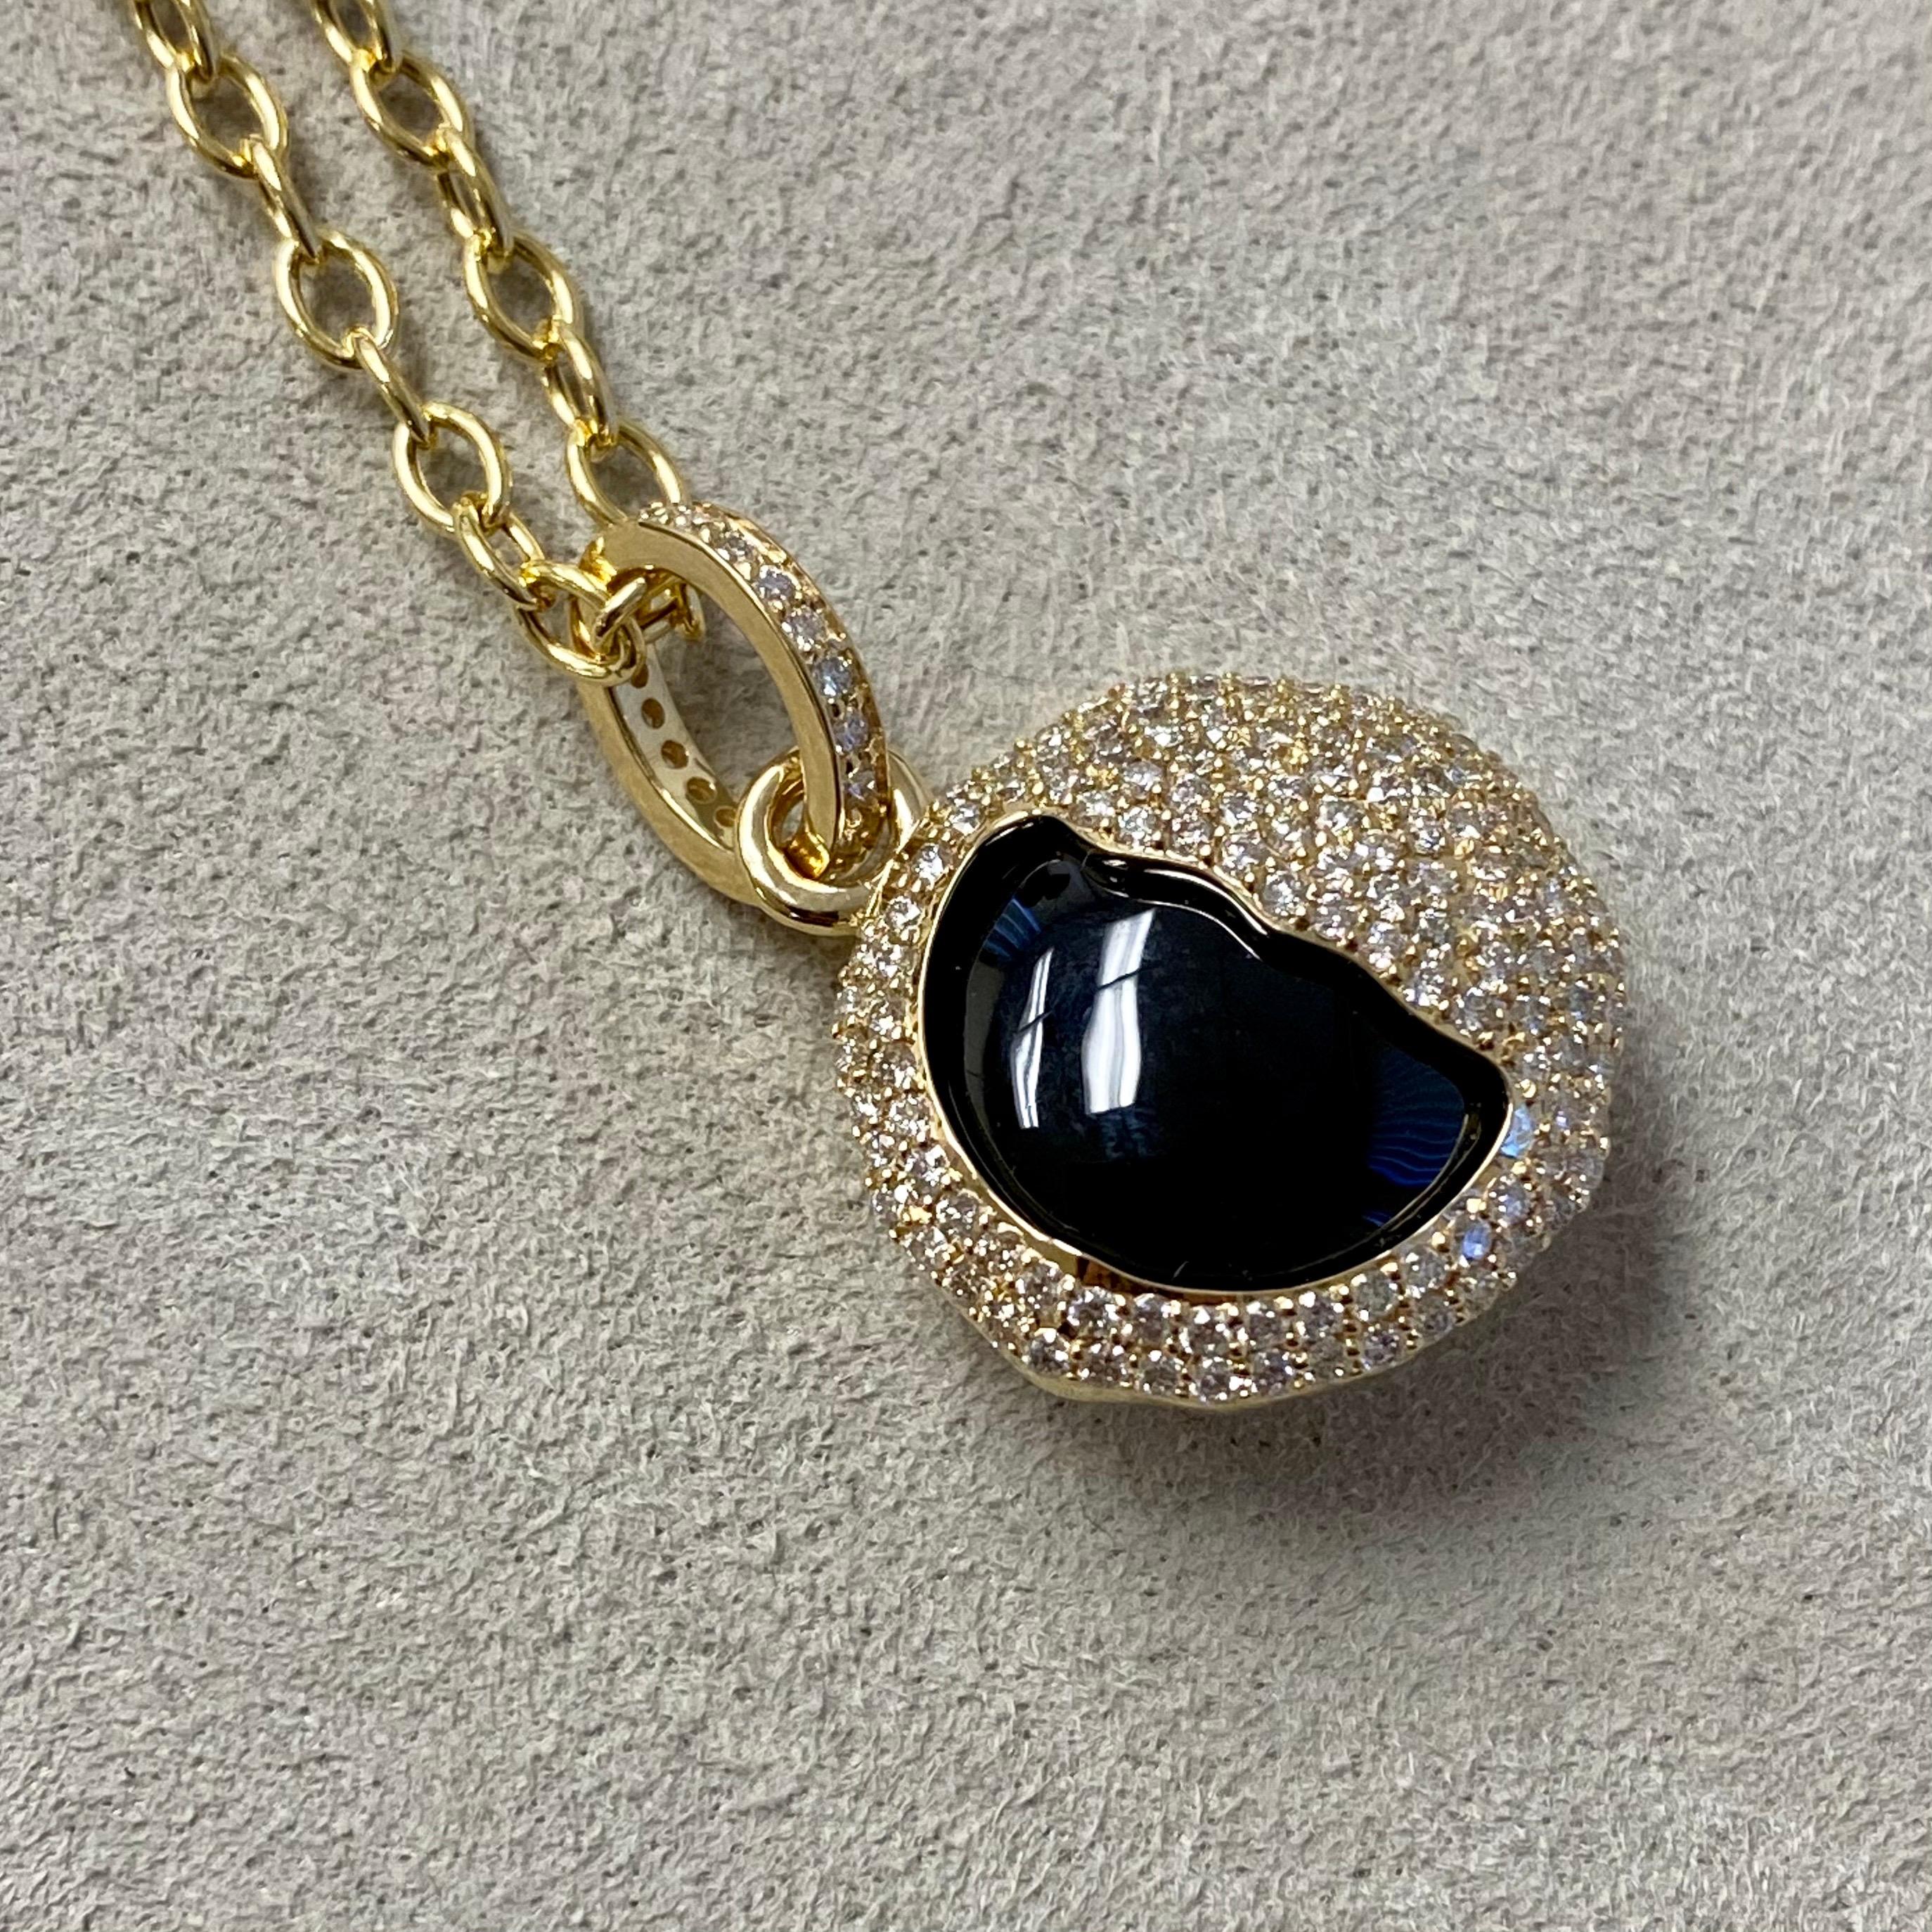 Round Cut Syna Yellow Gold Eclipse Pendant with Black Onyx and Diamonds